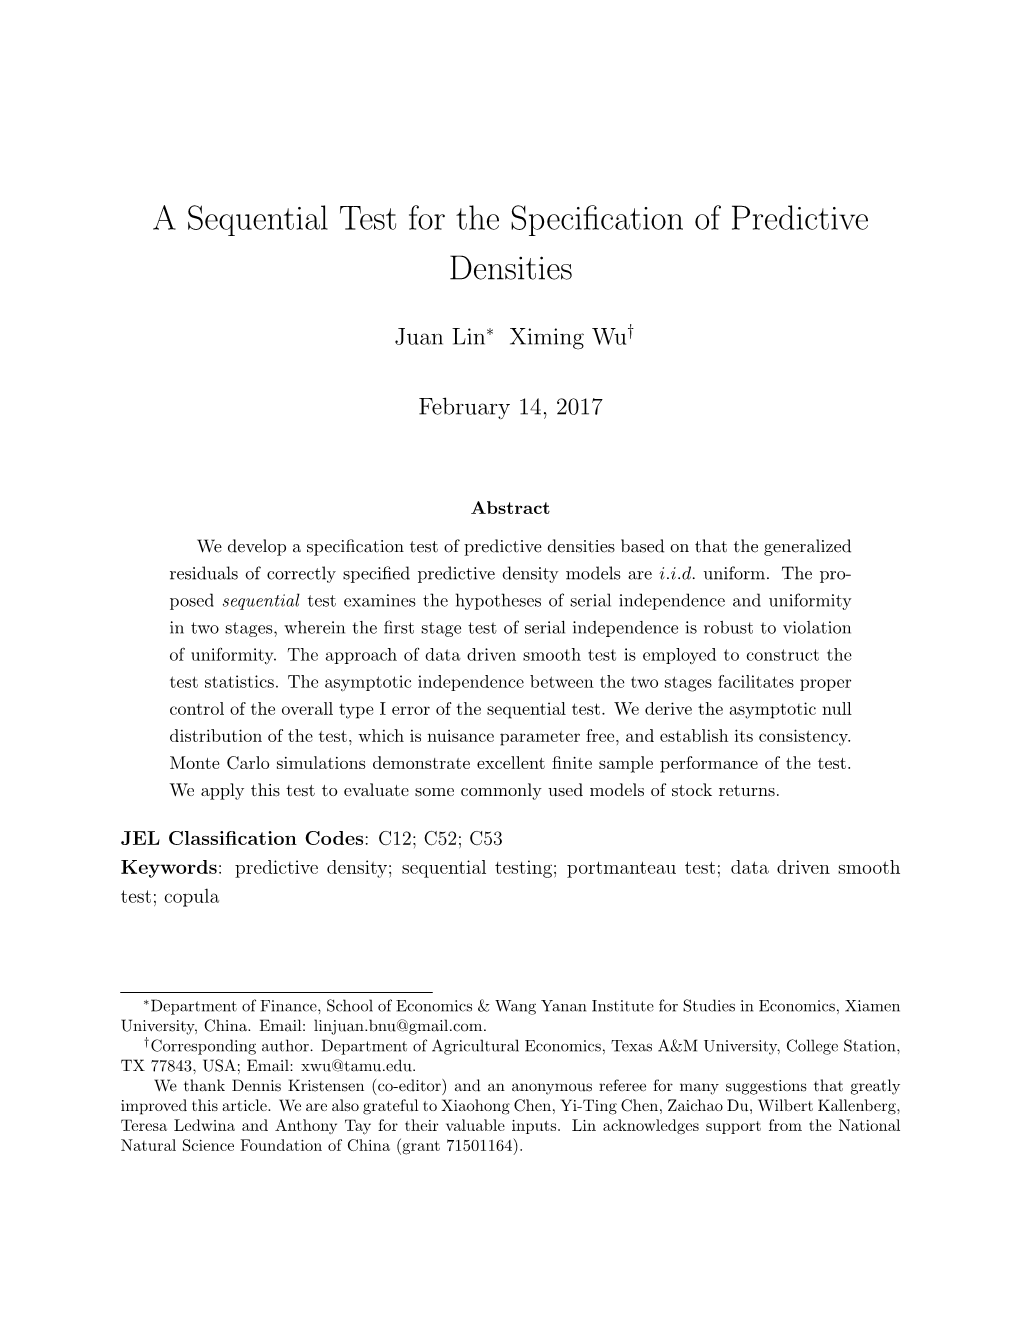 A Sequential Test for the Specification of Predictive Densities